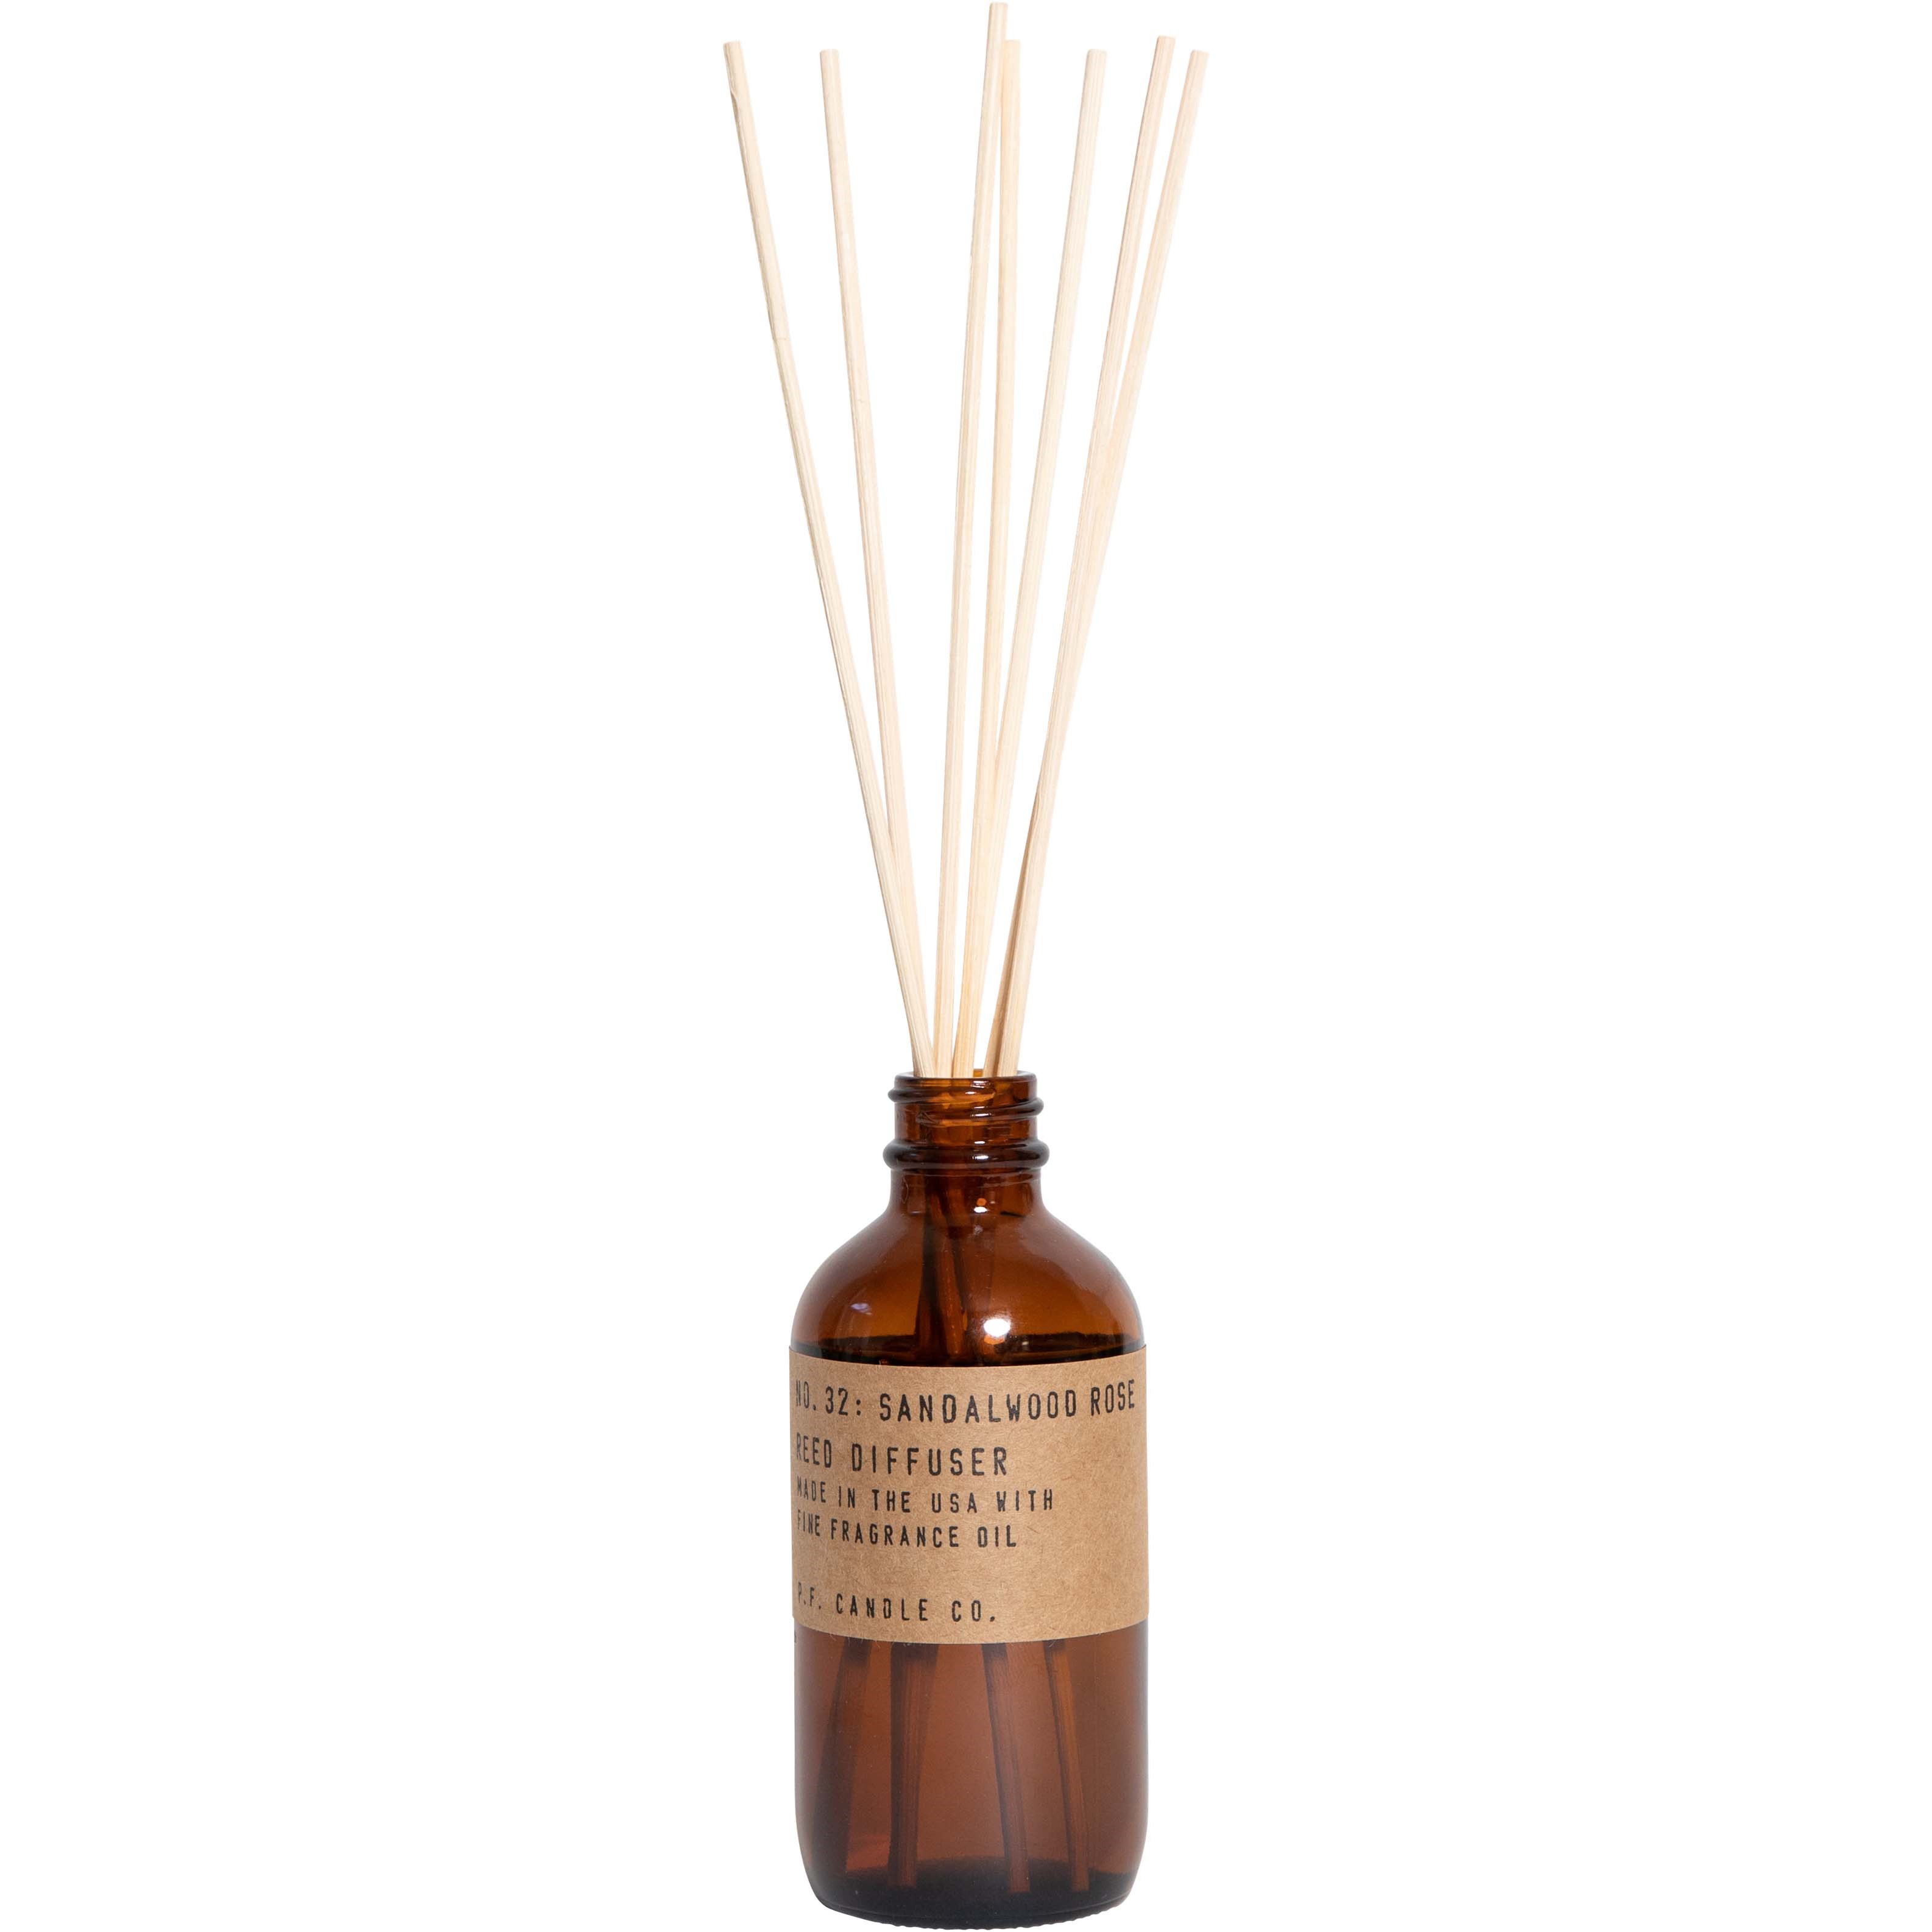 P.F. Candle Co. Sandalwood Rose reed diffuser 103 ml